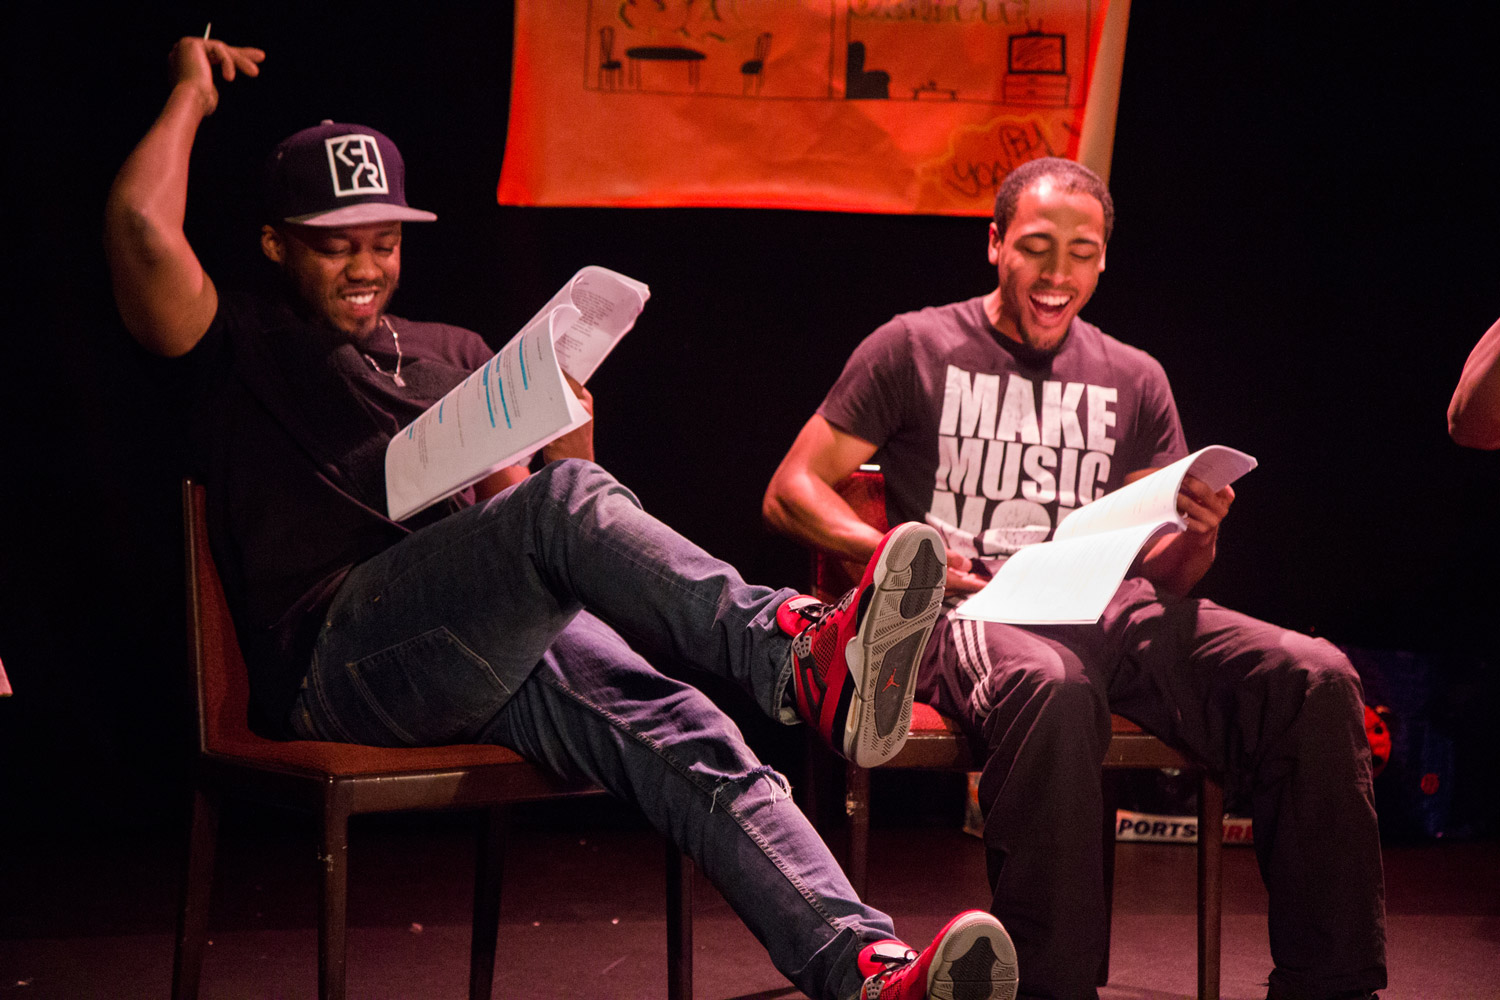 Up North By Jonny Wright A new North/South Hip Hop musical exploring black identity and the music industry.